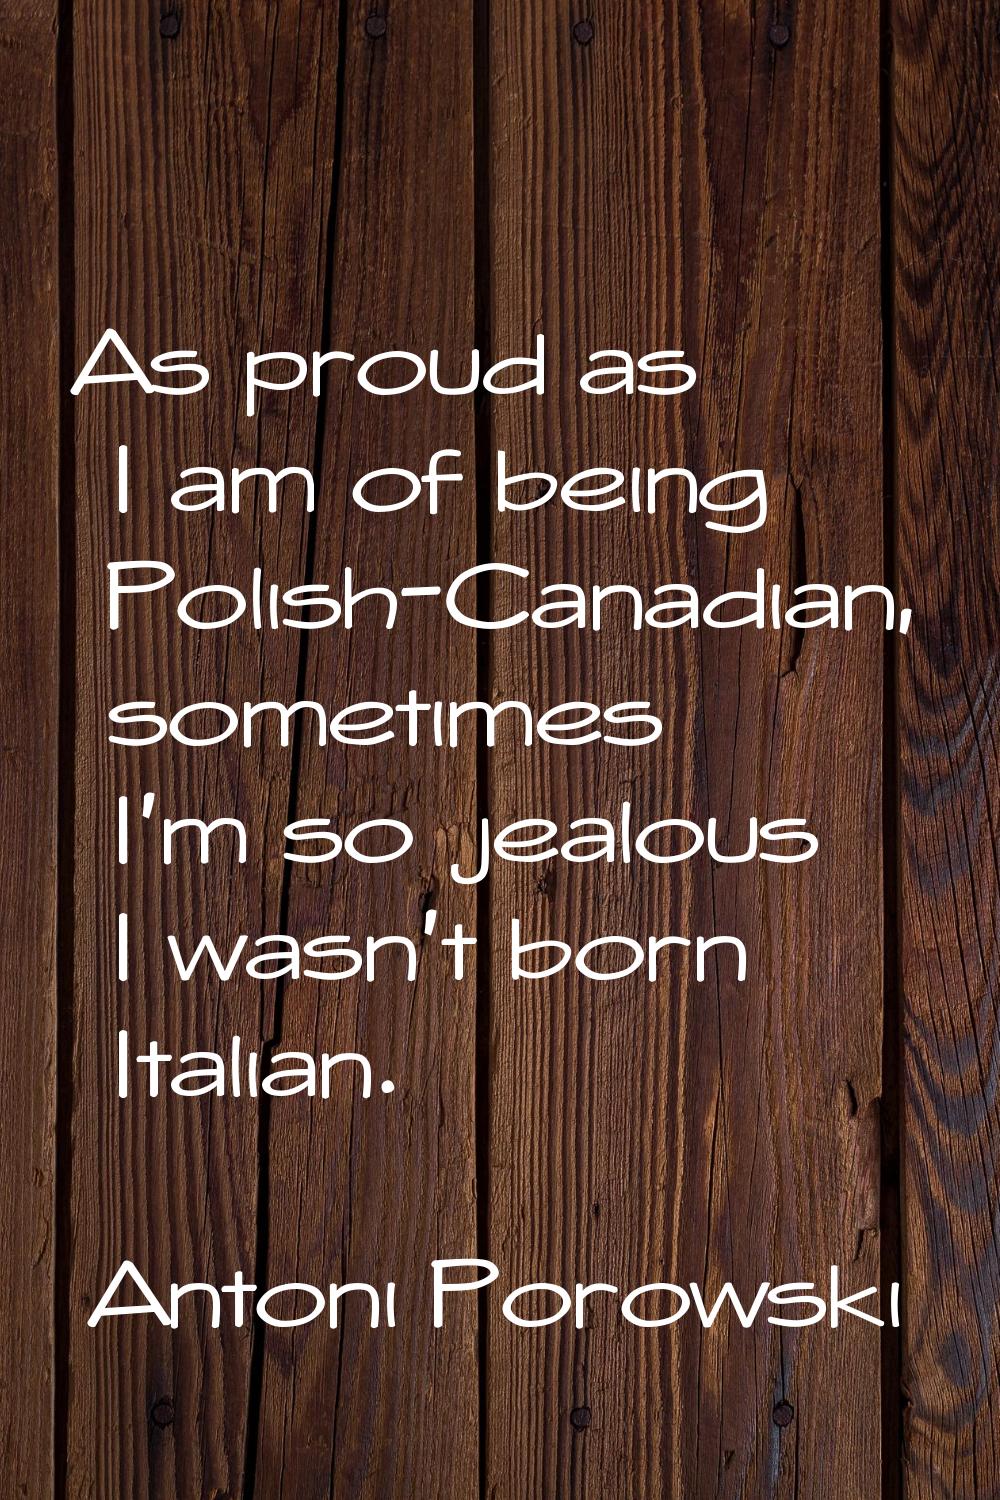 As proud as I am of being Polish-Canadian, sometimes I'm so jealous I wasn't born Italian.